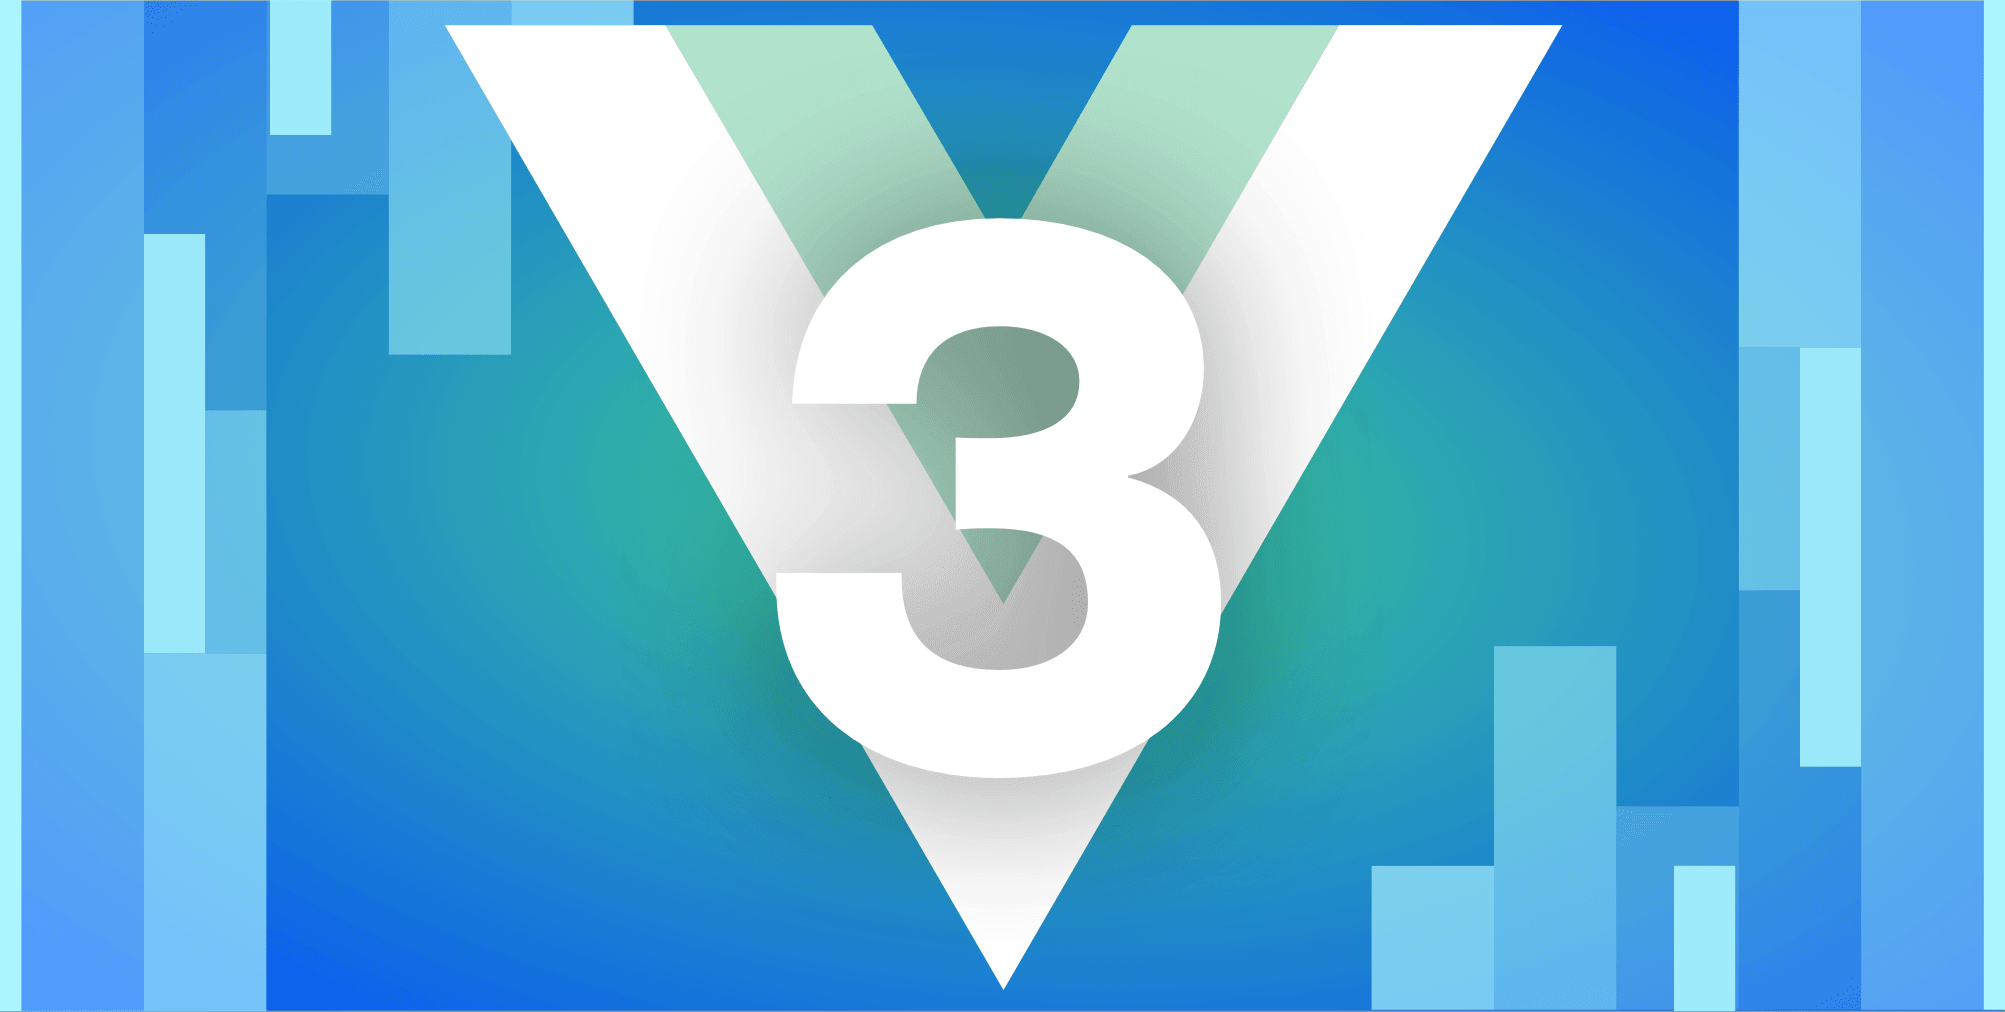 Learn The Fundamentals Of Vue With Vue 3